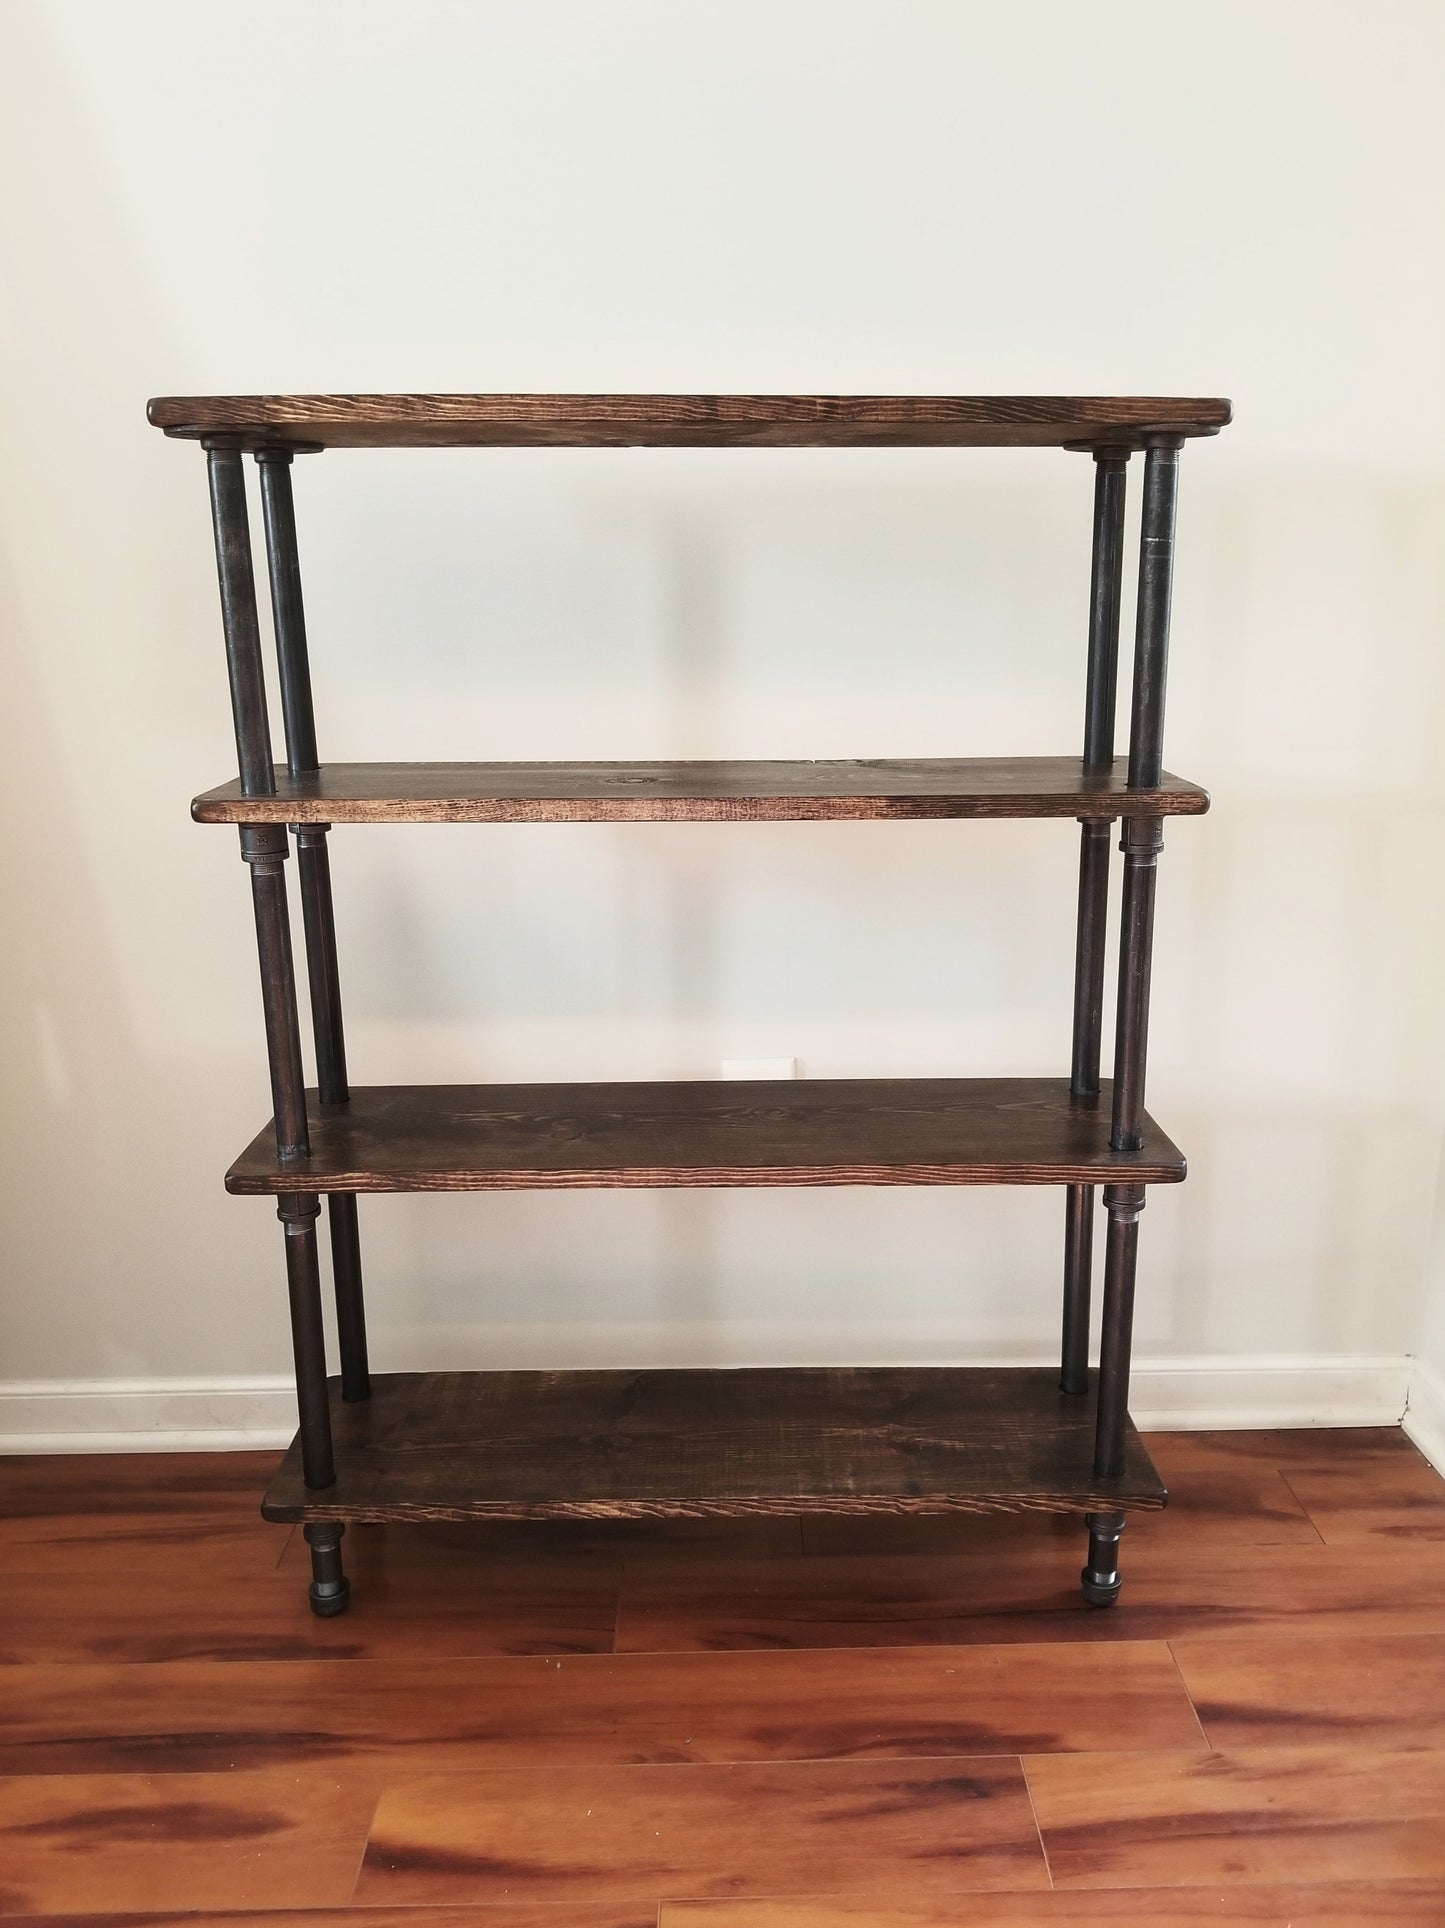 Steel and Wood Shelving Unit - Book Case - Wall Shelves - Multiple Shelf - Free Shipping